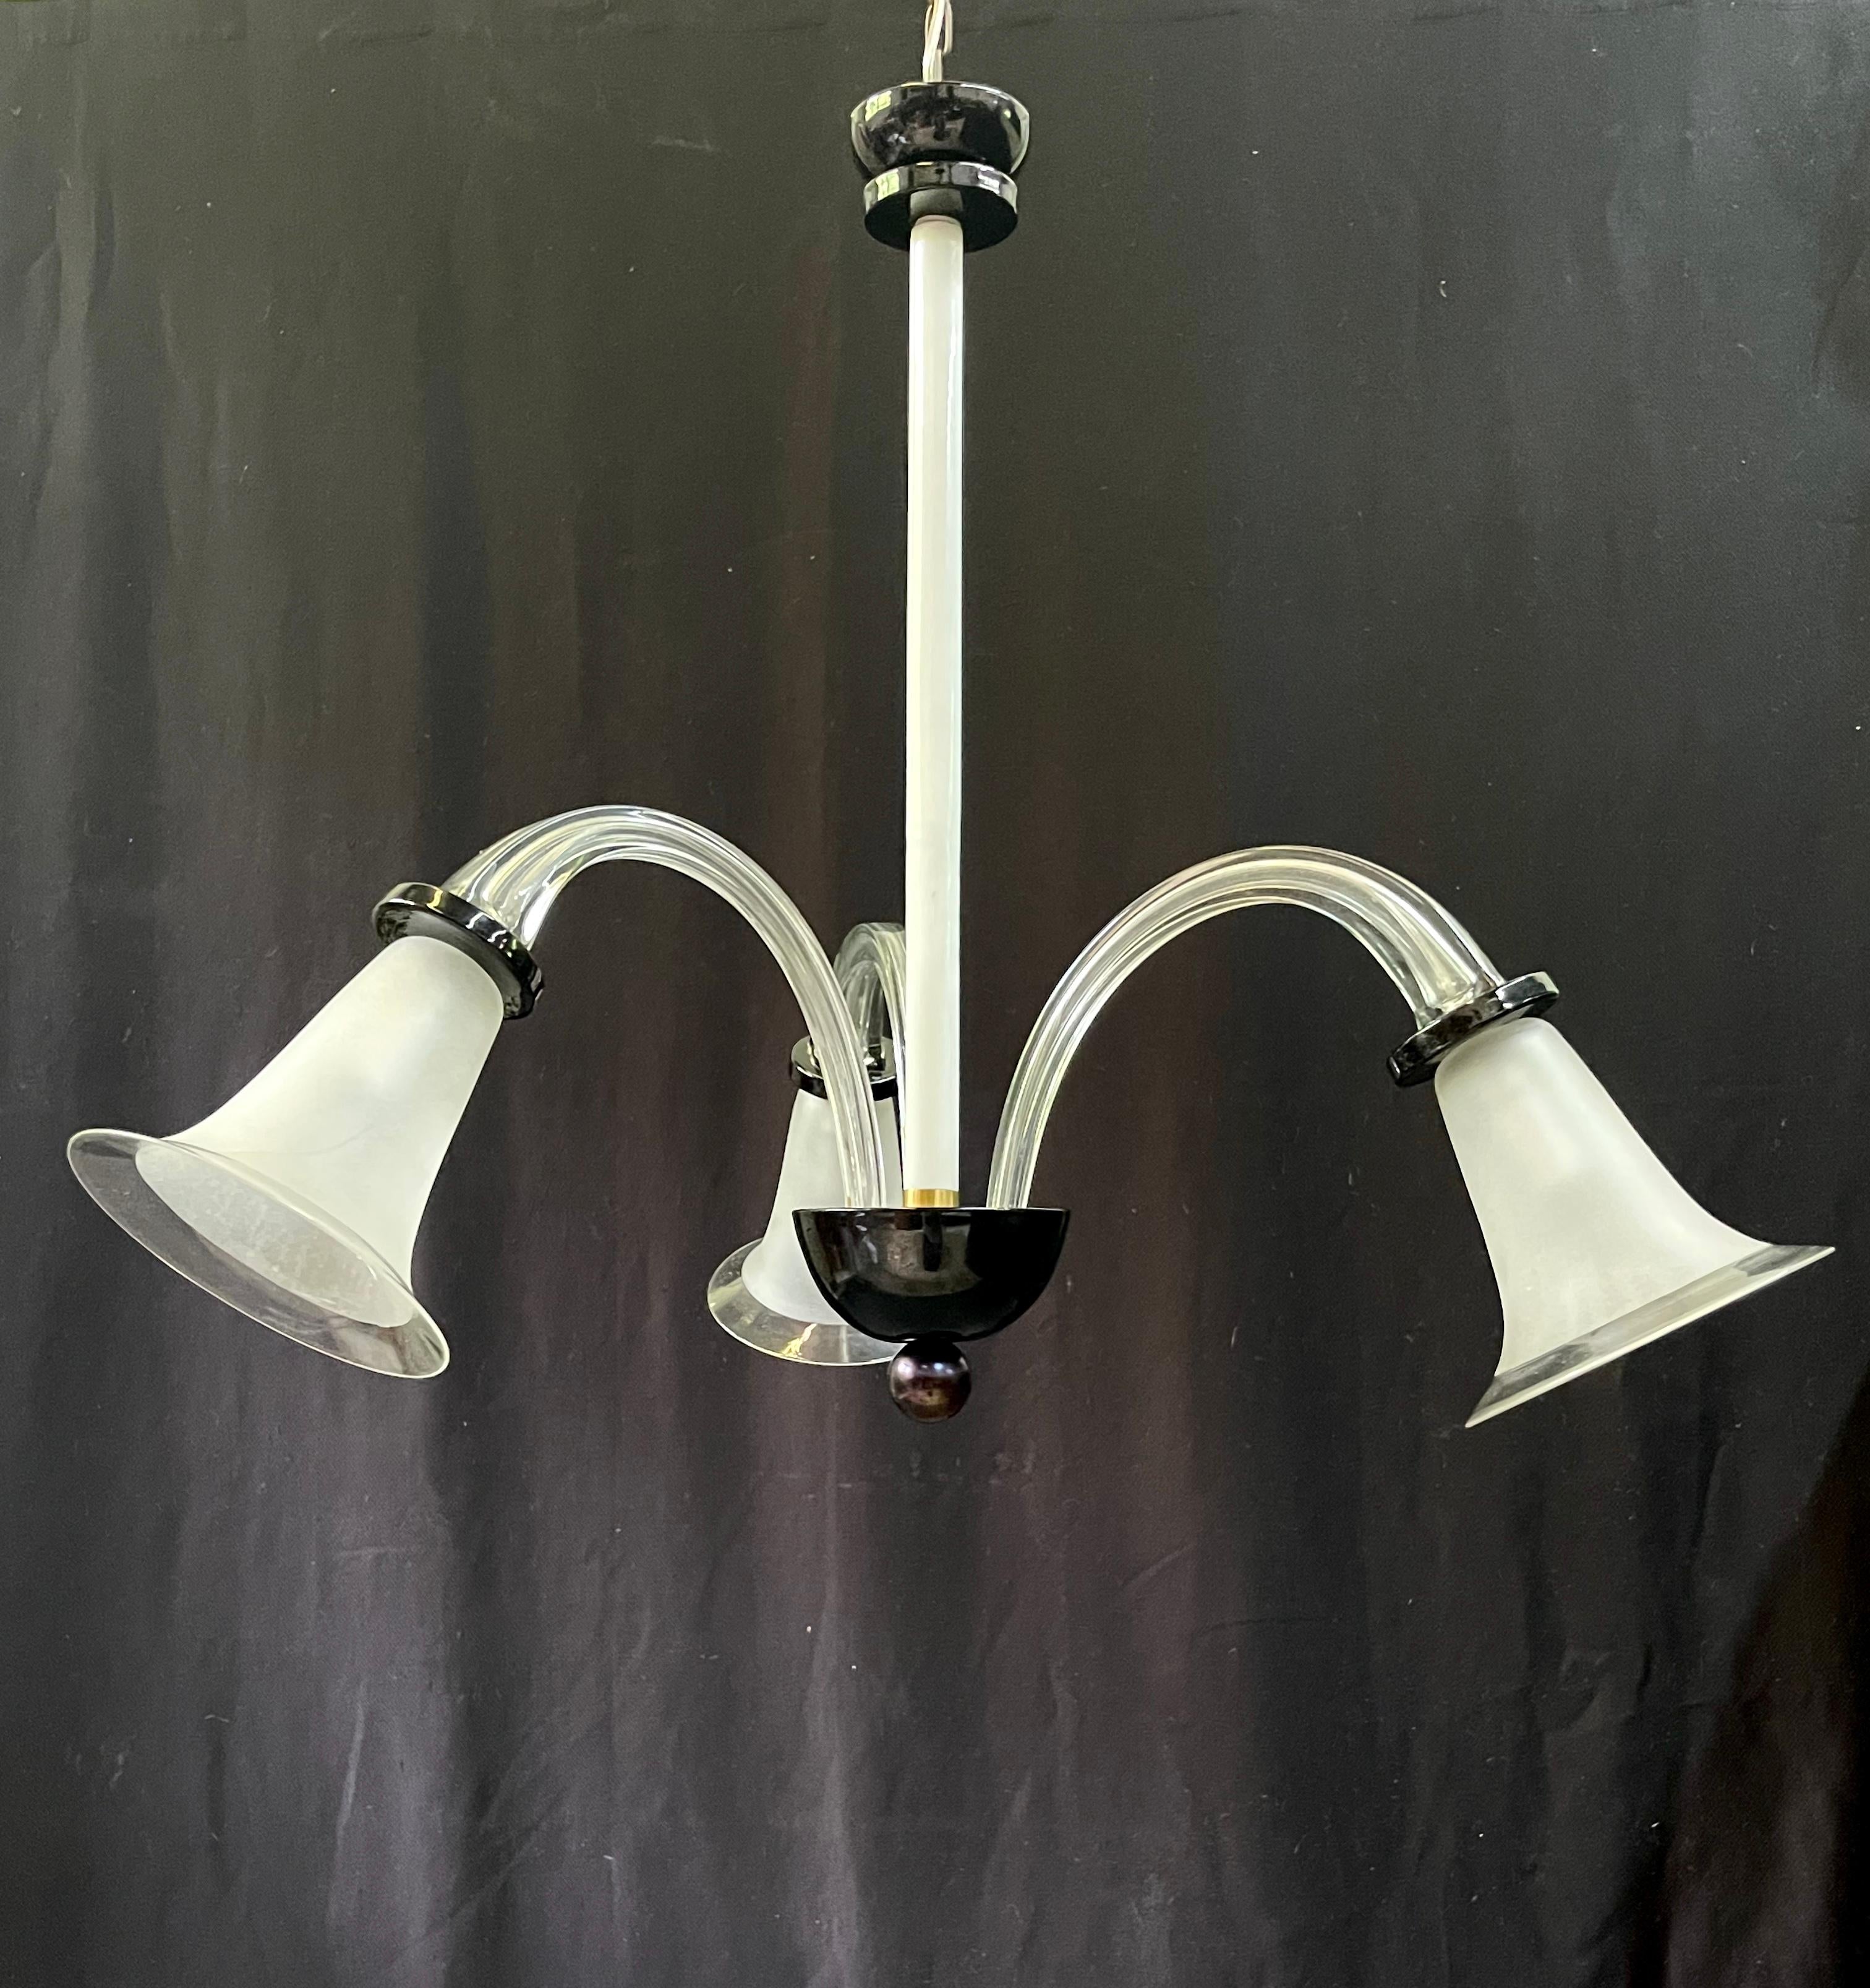 This mid 20th century Art Deco classic black and white Murano glass chandelier is characterized by its dramatic downward lights and superb simplicity. 

The three-light chandelier was made in Murano, Italy, around the 1940s. It is handcrafted of